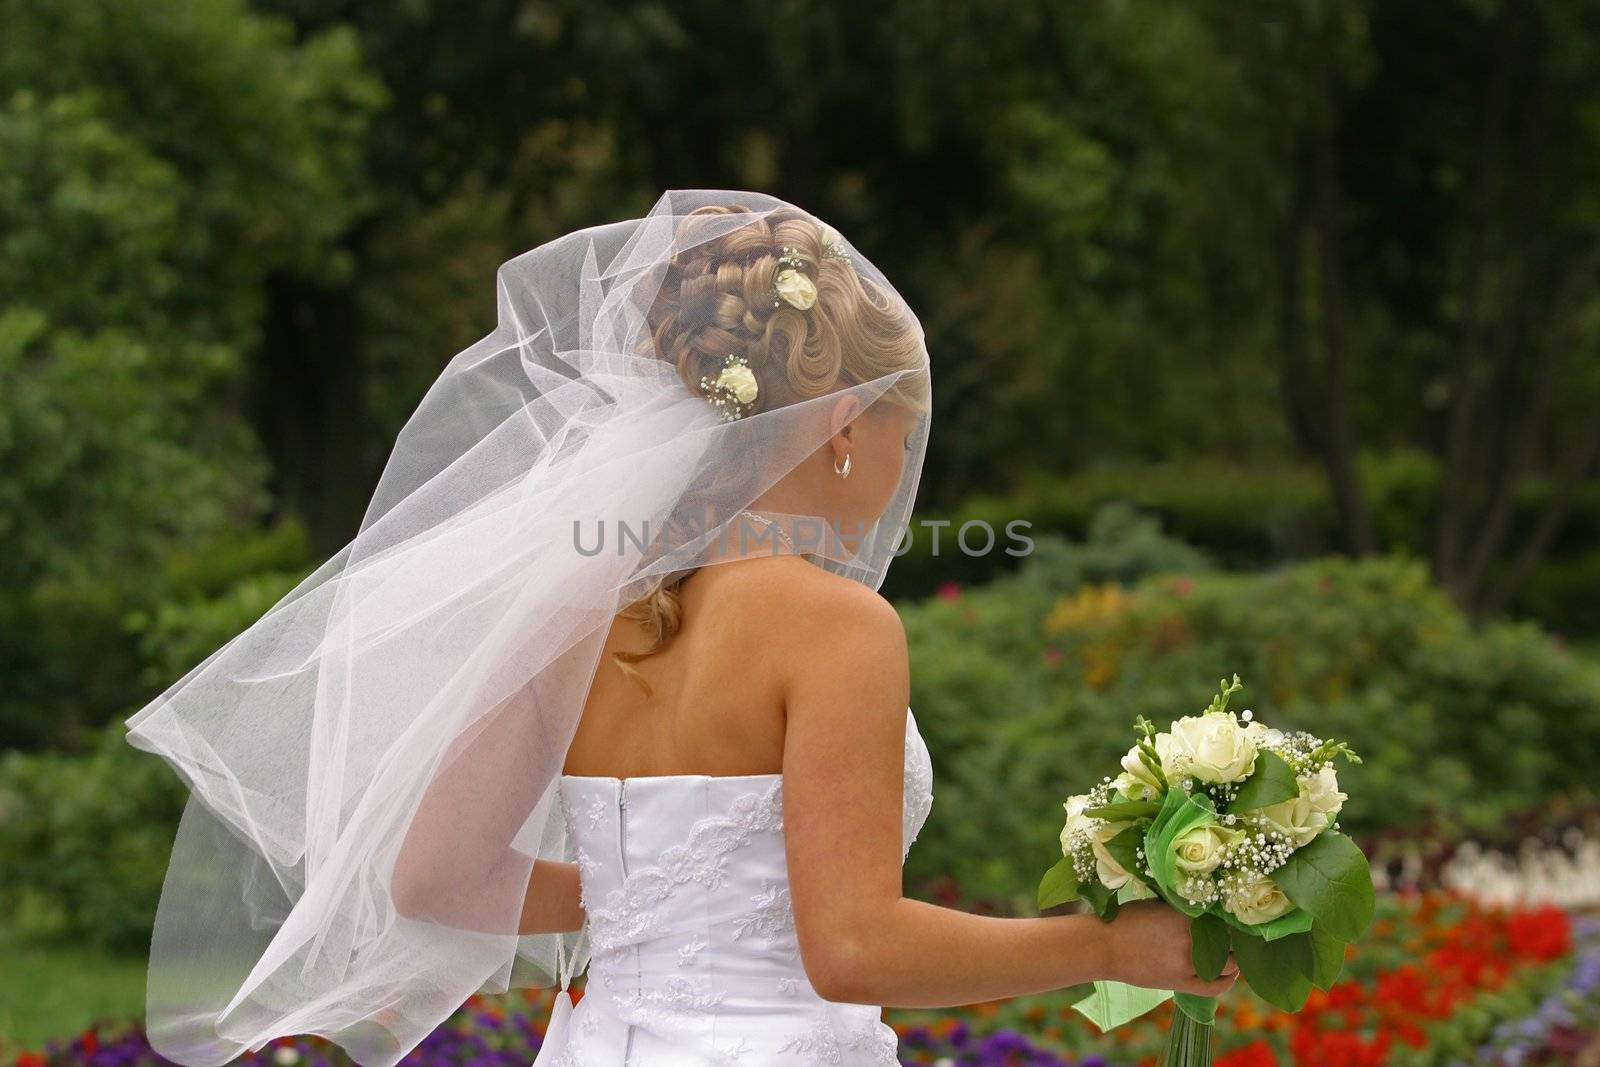 The bride in park by friday